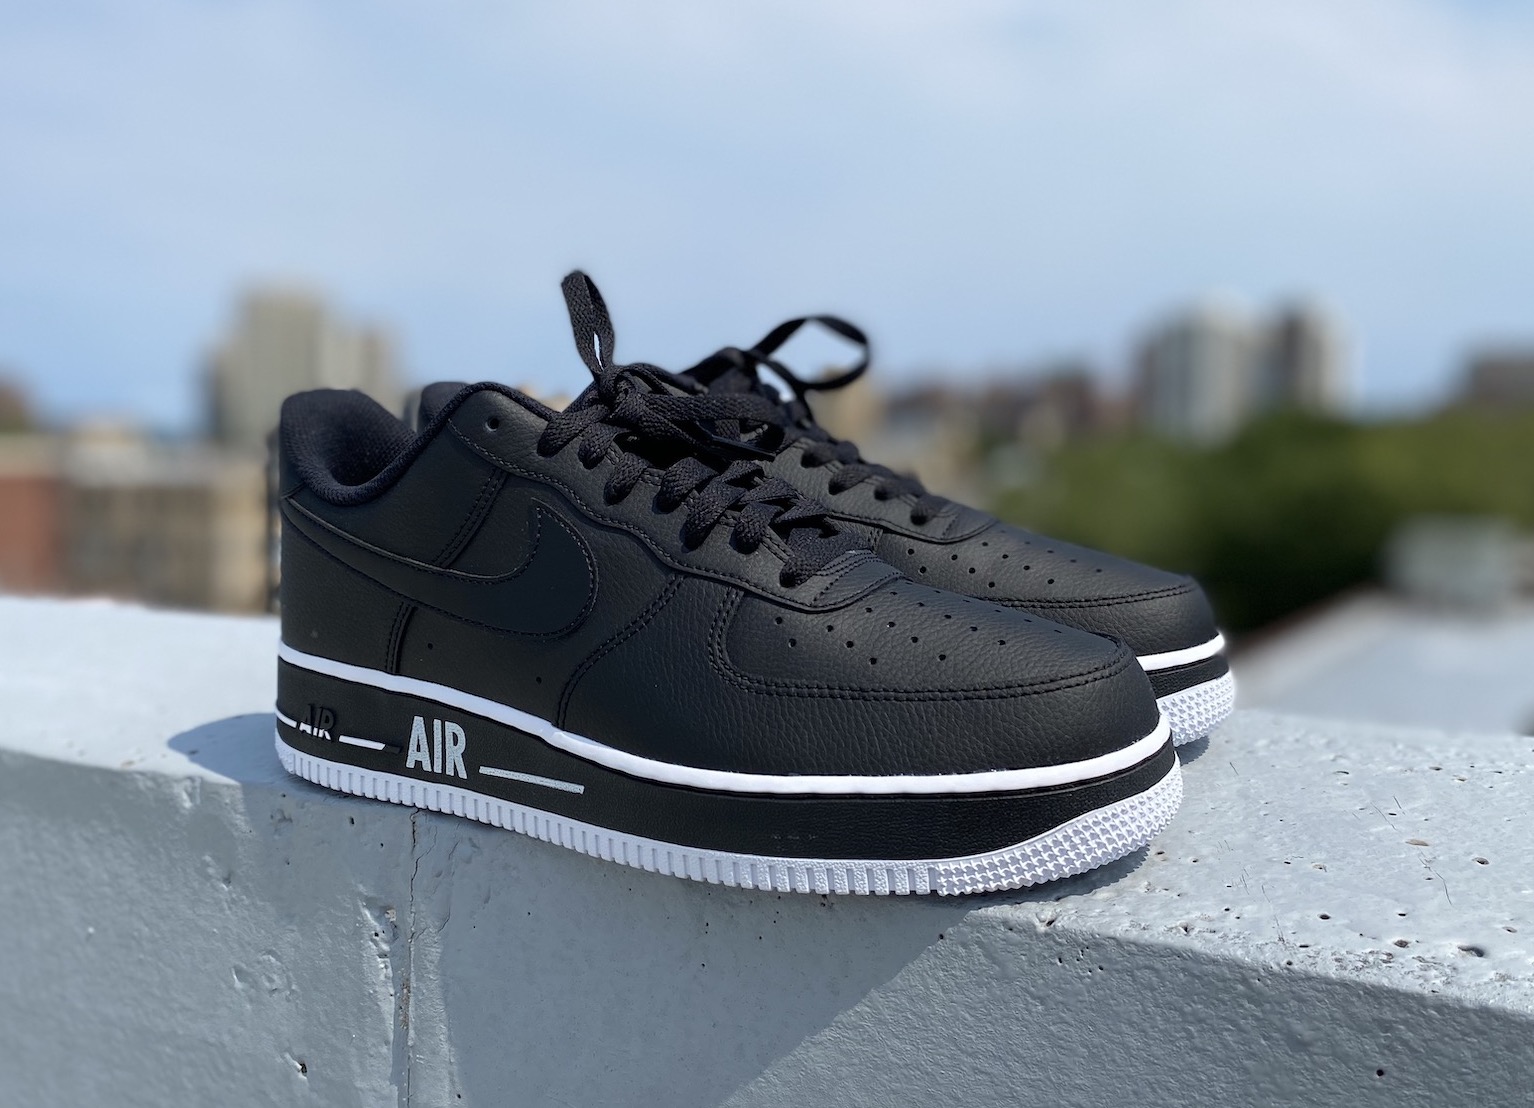 Nike Men's Air Force 1 Low '07 Casual Shoes